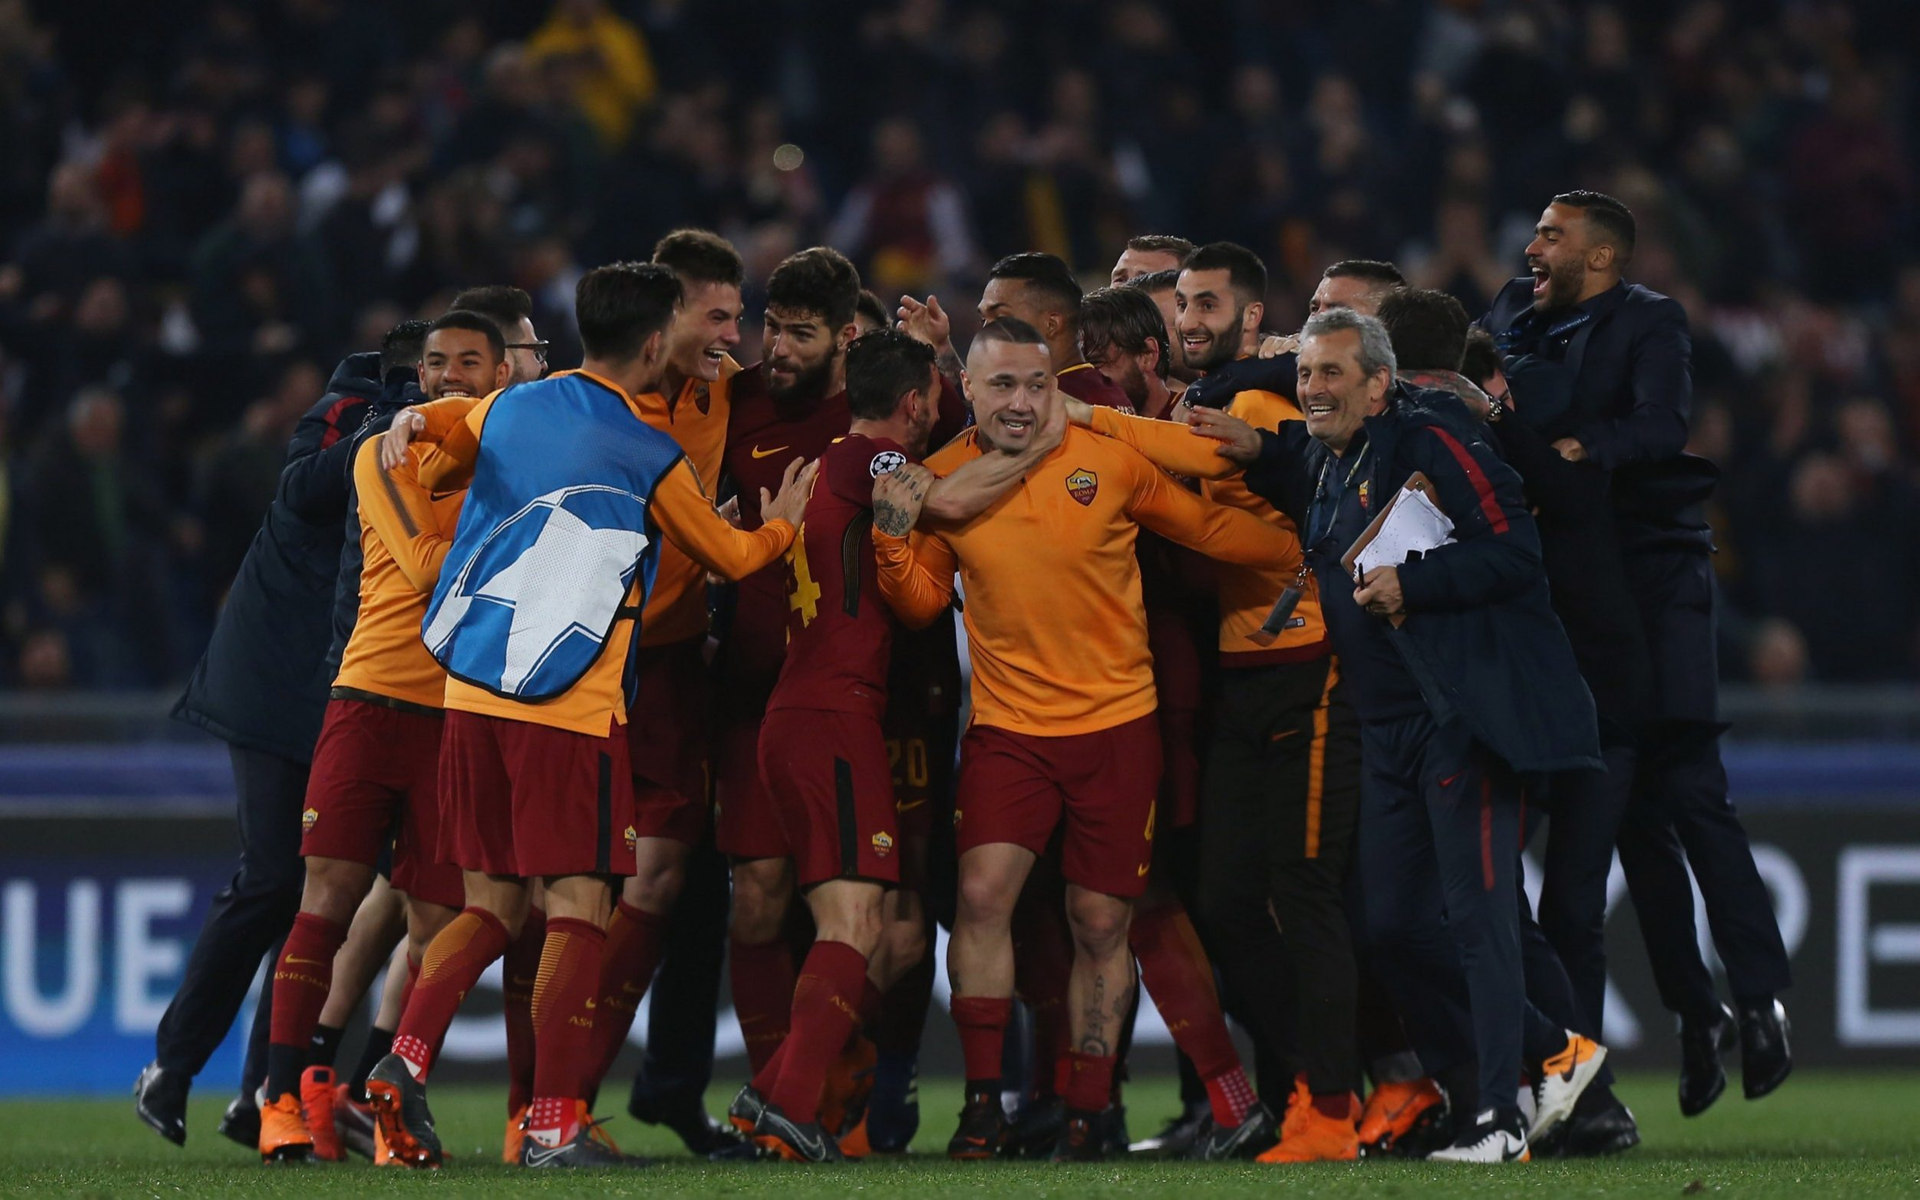 Roma players mob each other after their great win. Net.